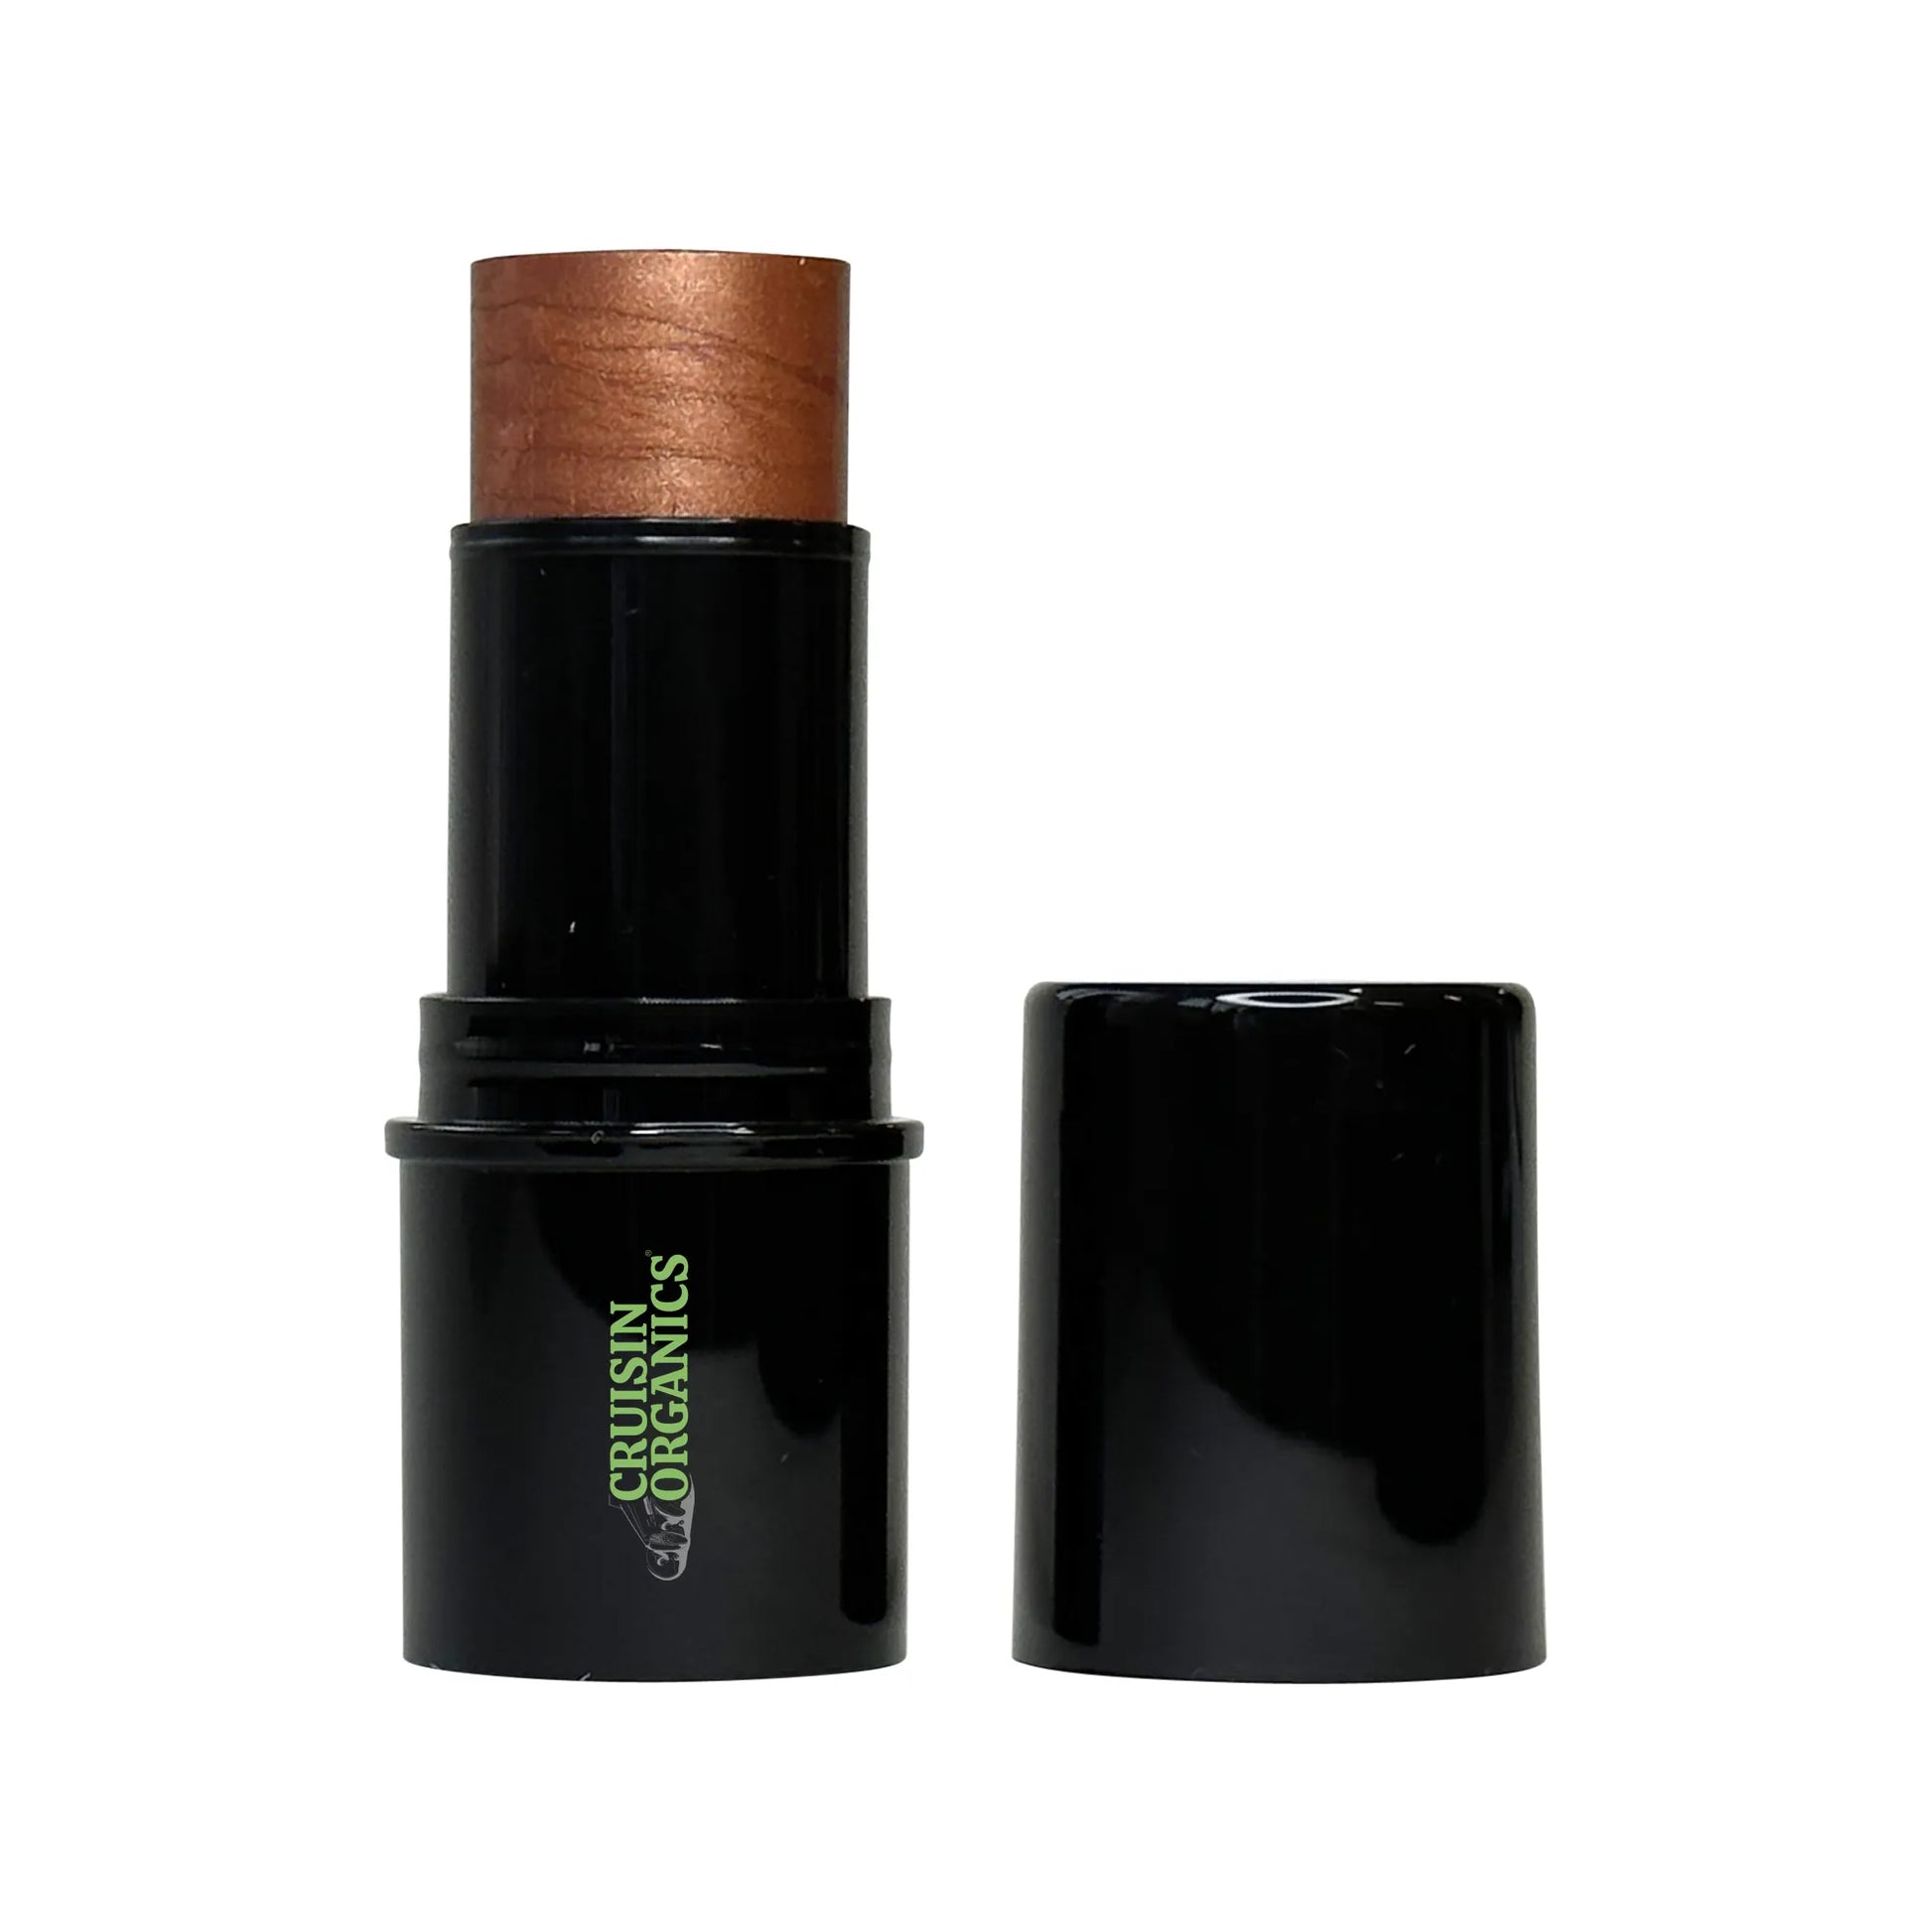 Cruisin Organics Bronze Lights Highlighted Stick will be the pick-me-up you need throughout the day. Get a perfect, radiant glow with this easy-to-use, nourishing highlighter stick. Infused with vitamin C, you’ll instantly brighten up your cheeks with shimmer. The highlighter stick also contains vitamins A and E, which promote skin health and soften the skin. Buildable and streak-free, this luminous highlighter stick will bring your best features forward.